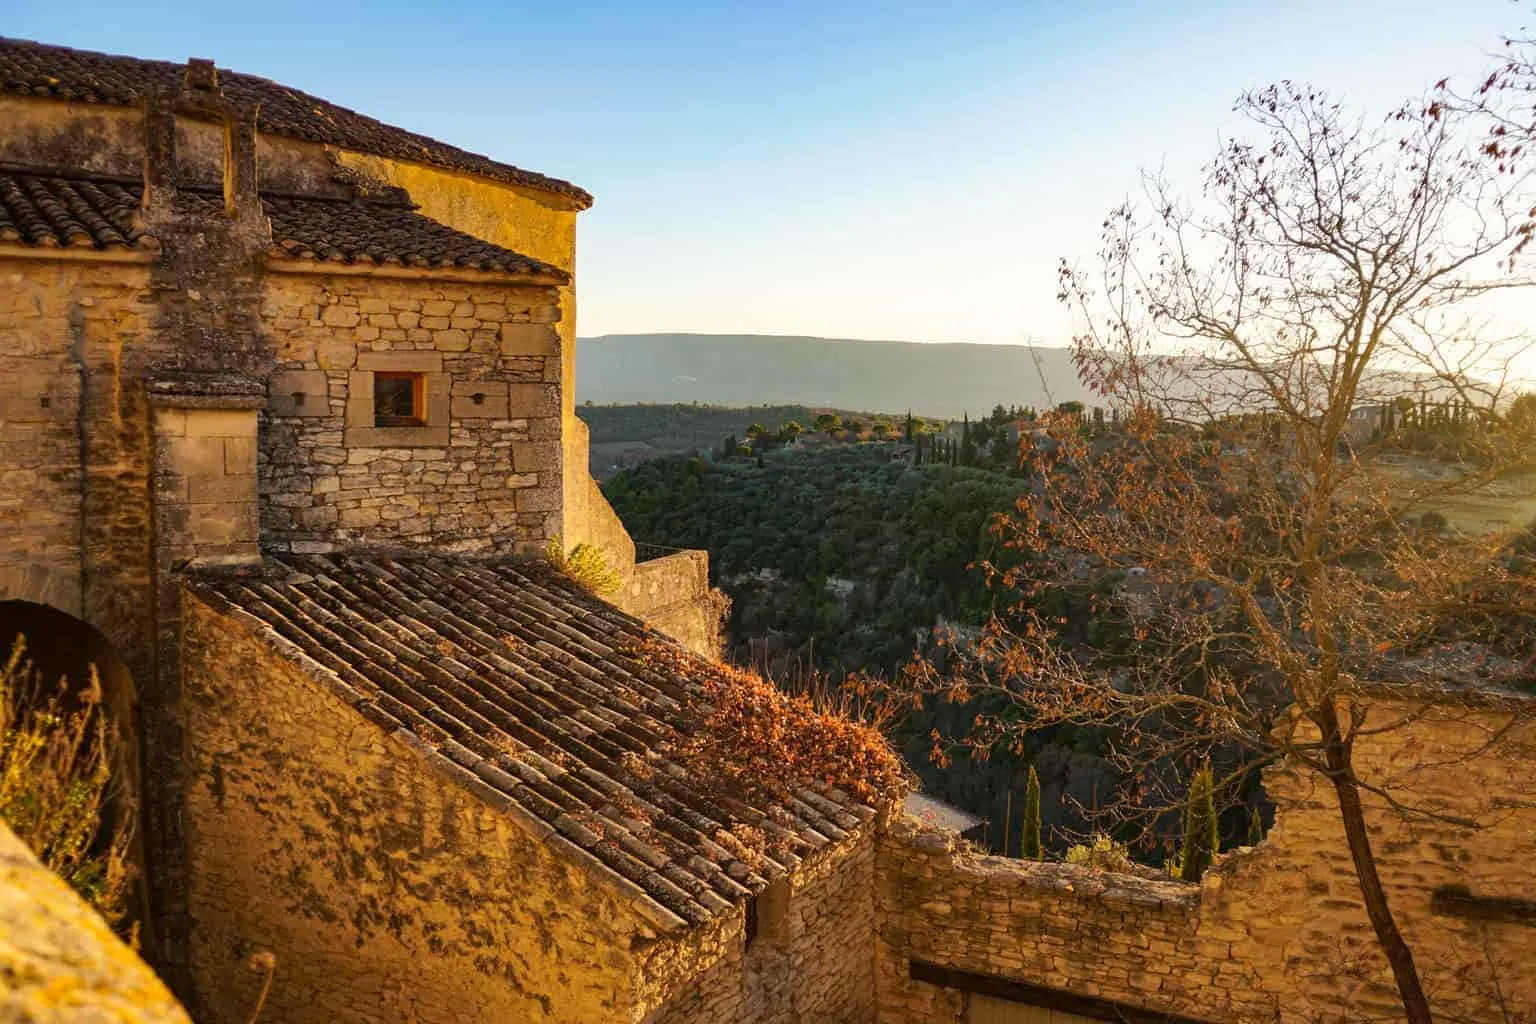 Best Day Trips from Aix en Provence, France. Top Tours from Aix-en-Provence.